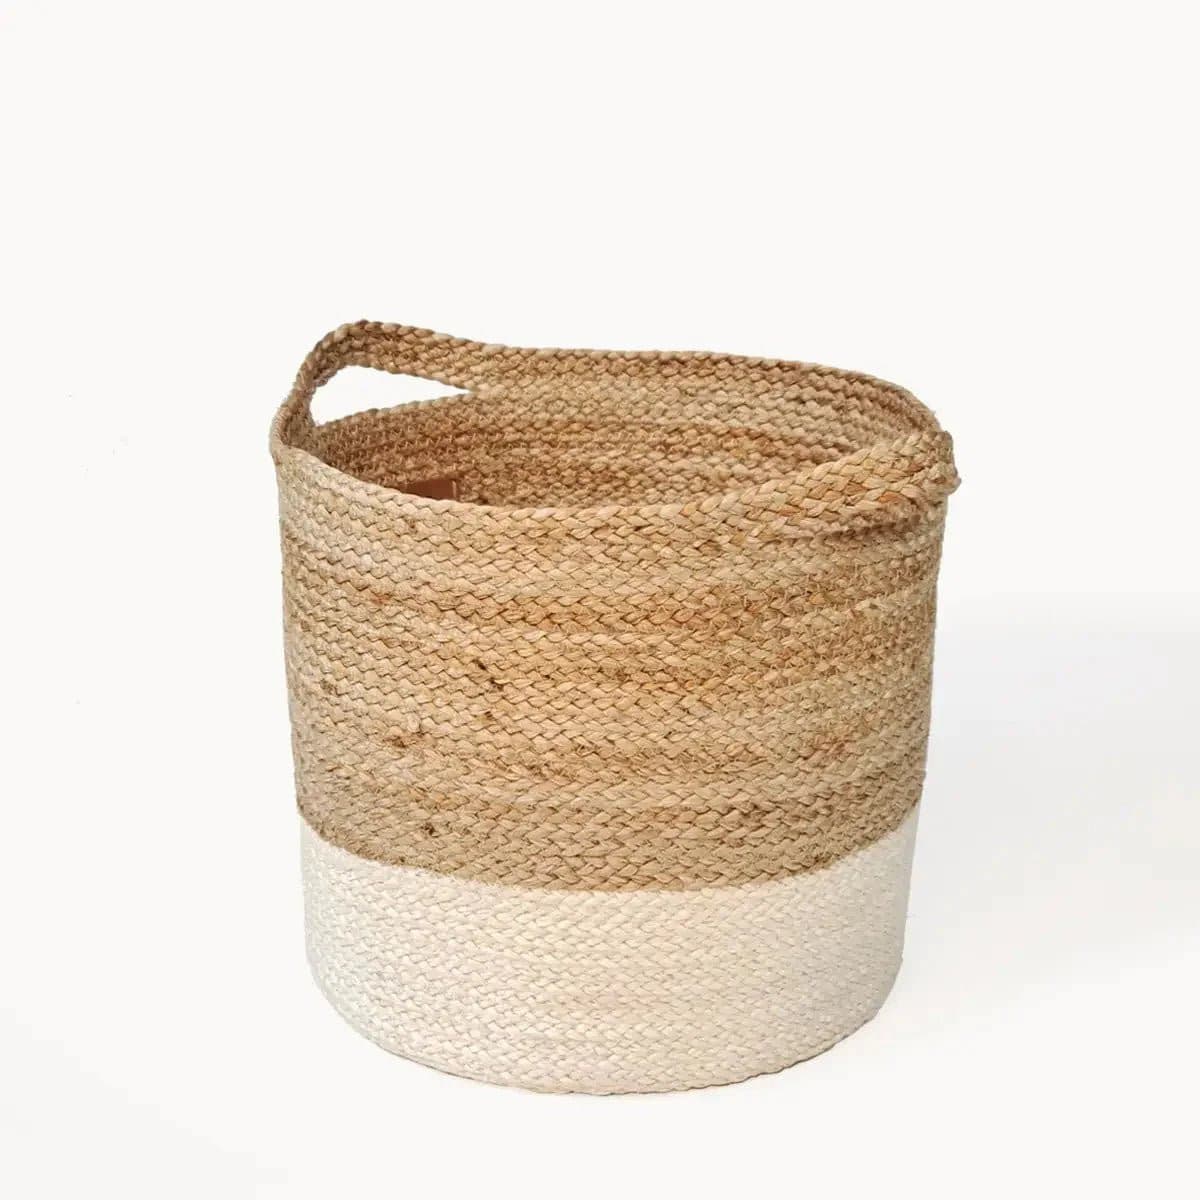 Handwoven Wicker Storage Kata Colorblock Basket - Small - Mindful Living Home